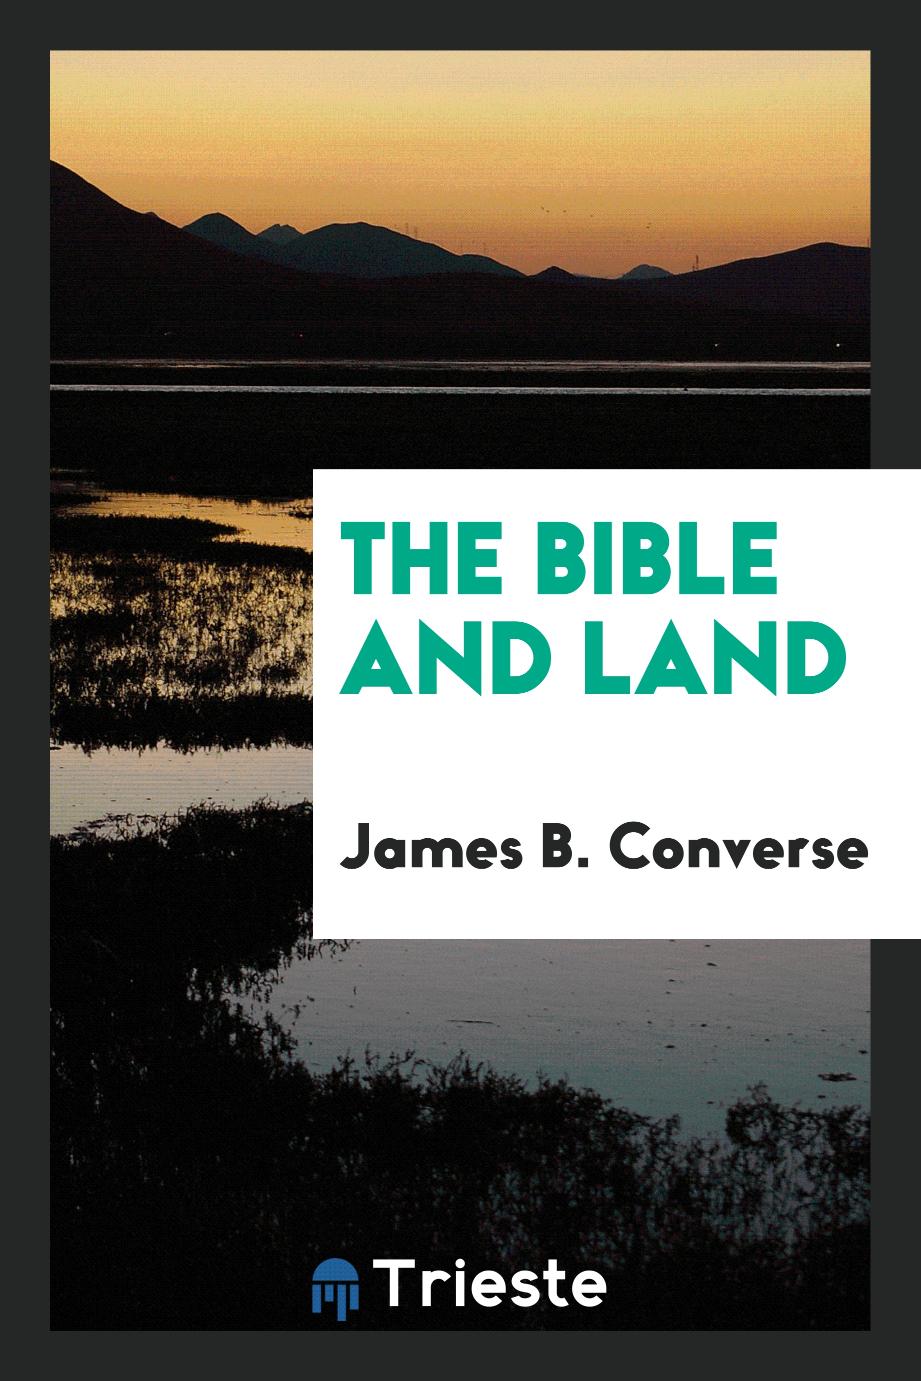 The Bible and land